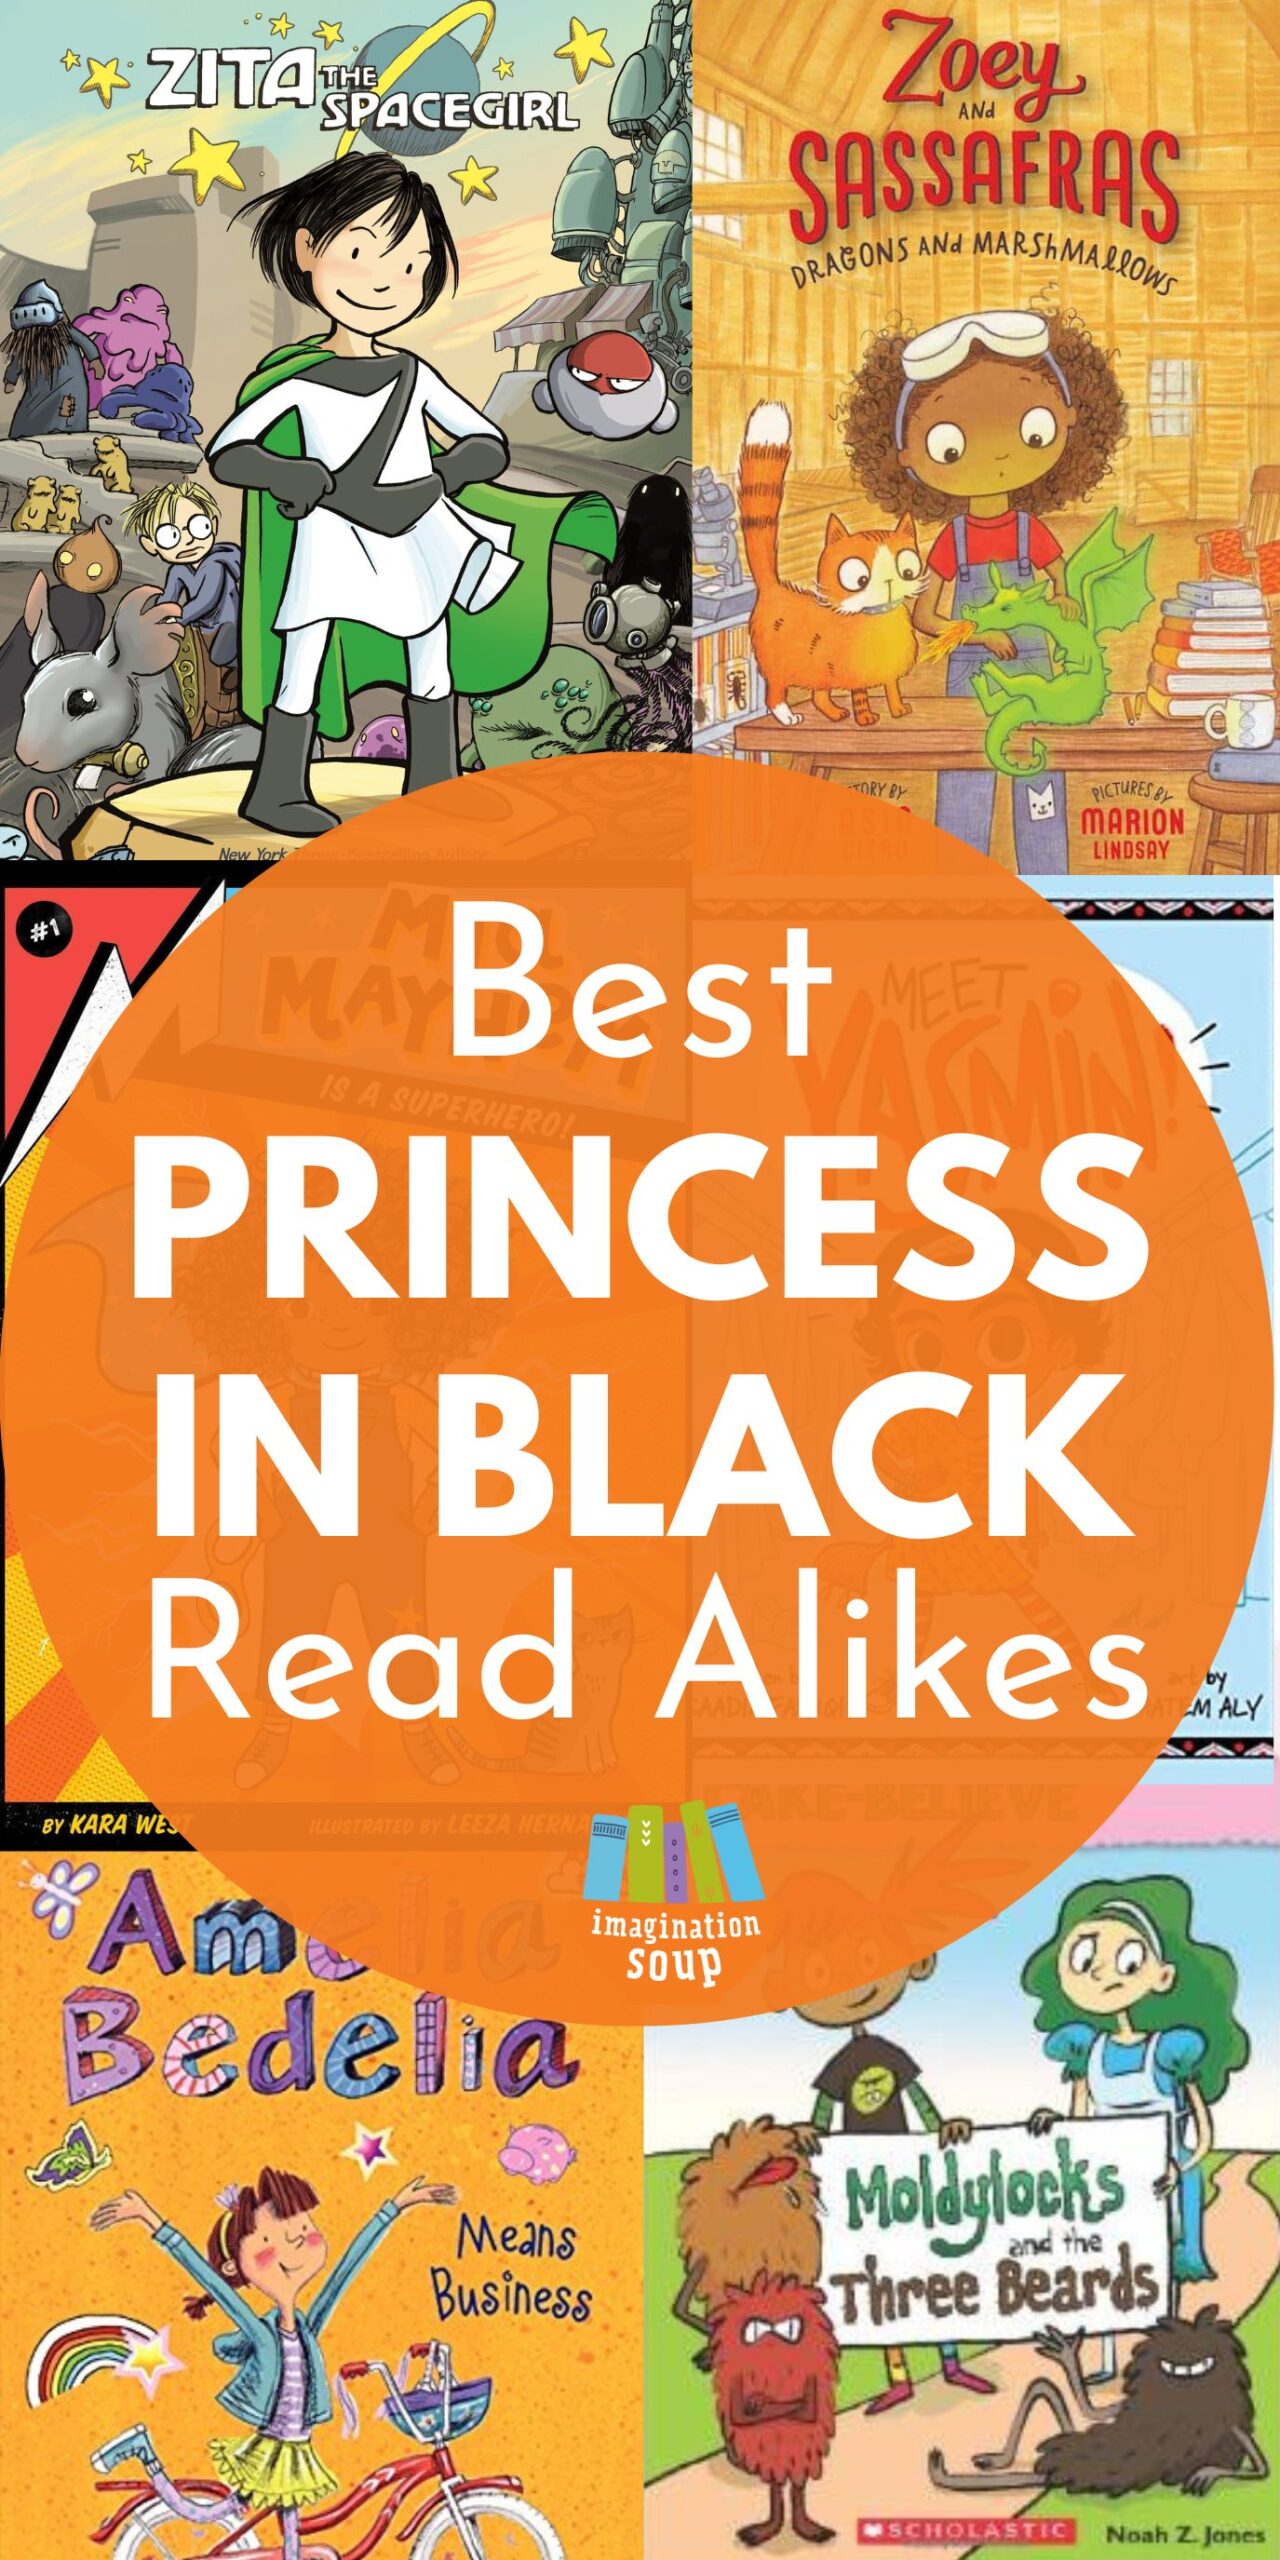 The Princess in Black chapter book series by Shannon Hale and illustrated by LeUyen Pham is a popular fictional adventure about a spunky princess who secretly fights monsters. It's a hugely popular beginning chapter book. If your kids love The Princess in Black books, here are more fantasy and adventure read alike book ideas to read next; books that they'll love just as much.